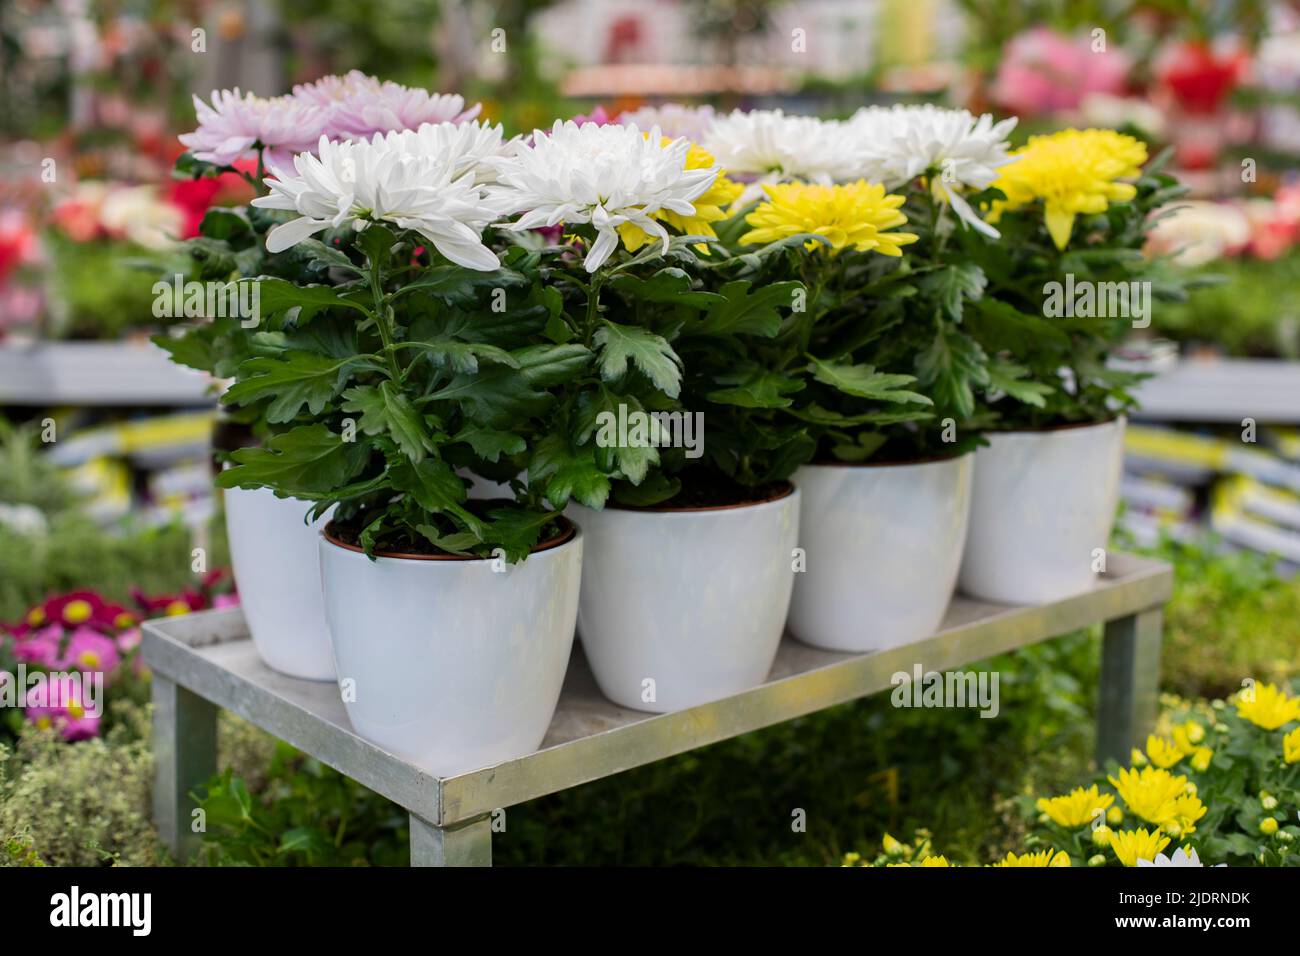 Chrysanthemum blossom in a pot in a flower shop. Spring flowers white and yellow chrysanthemums for gift Stock Photo